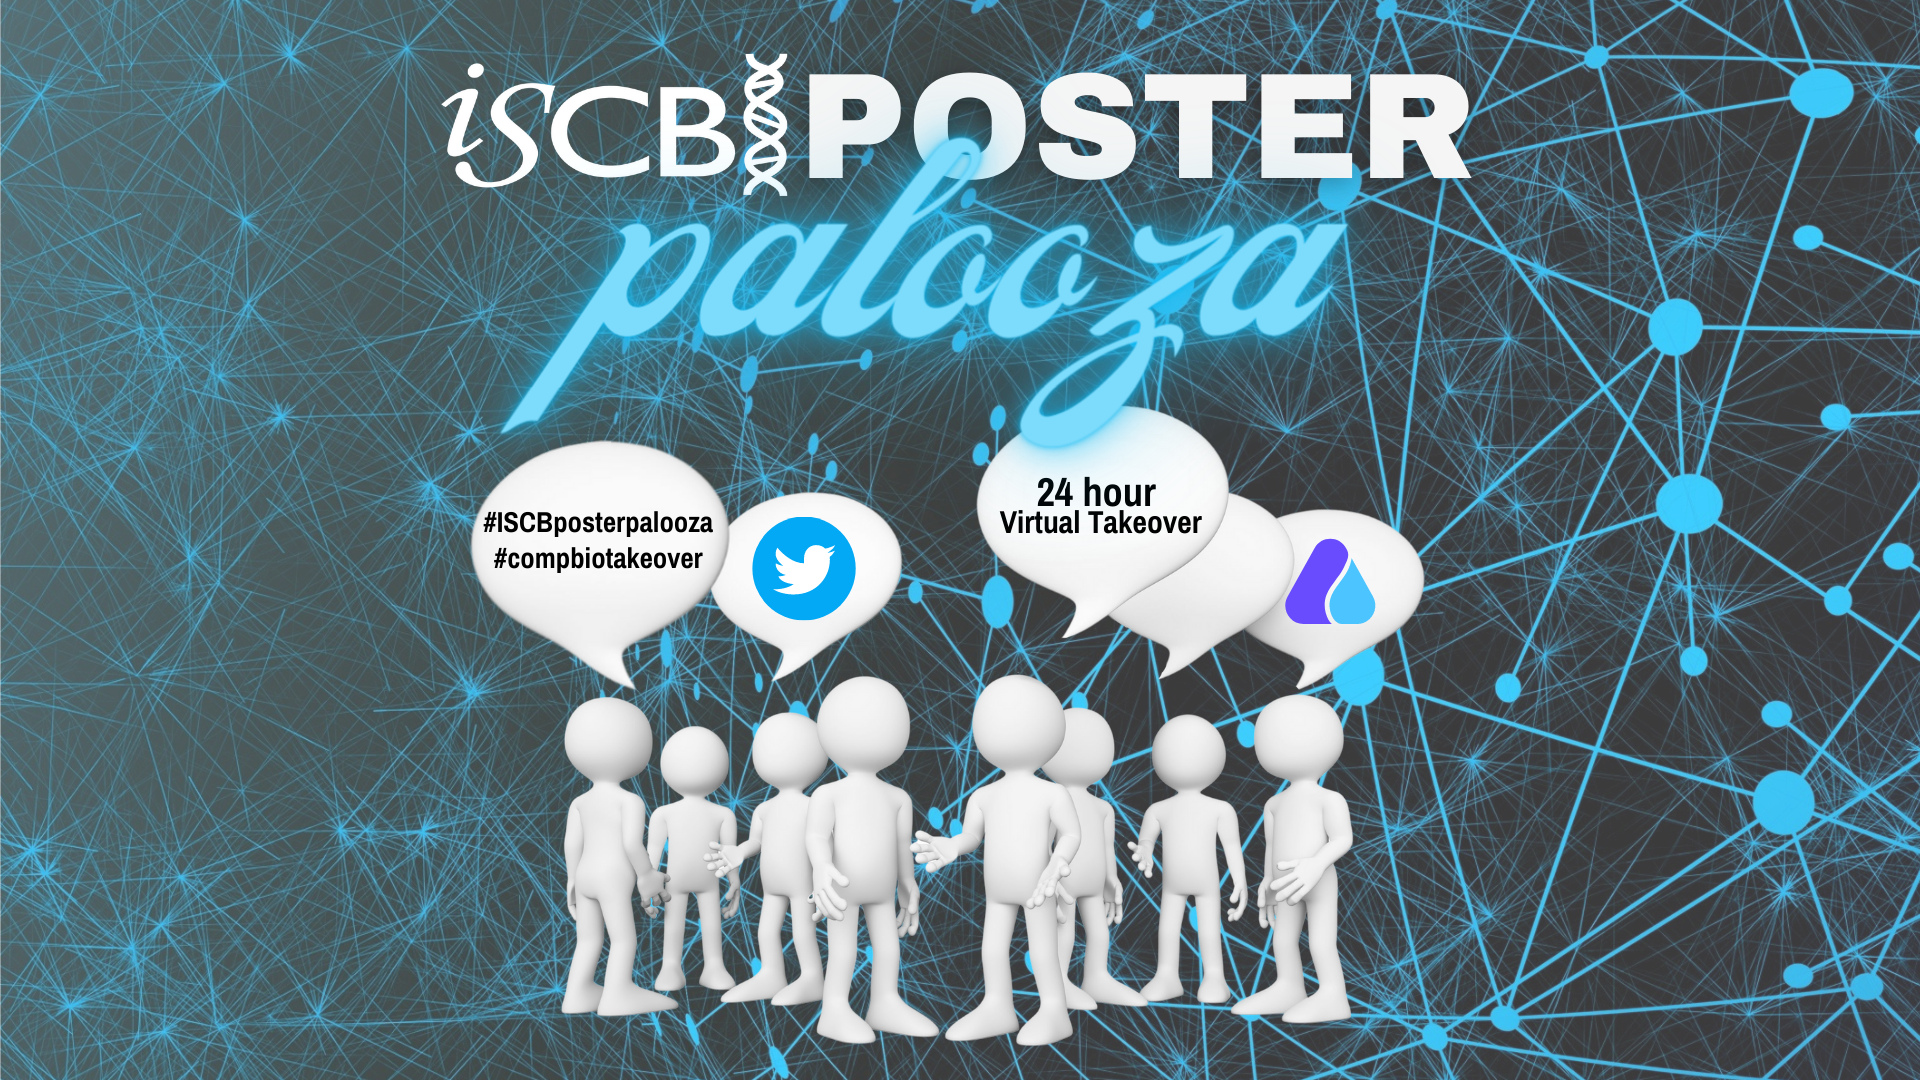 Mark your calendars for the upcoming ISCB Posterpalooza